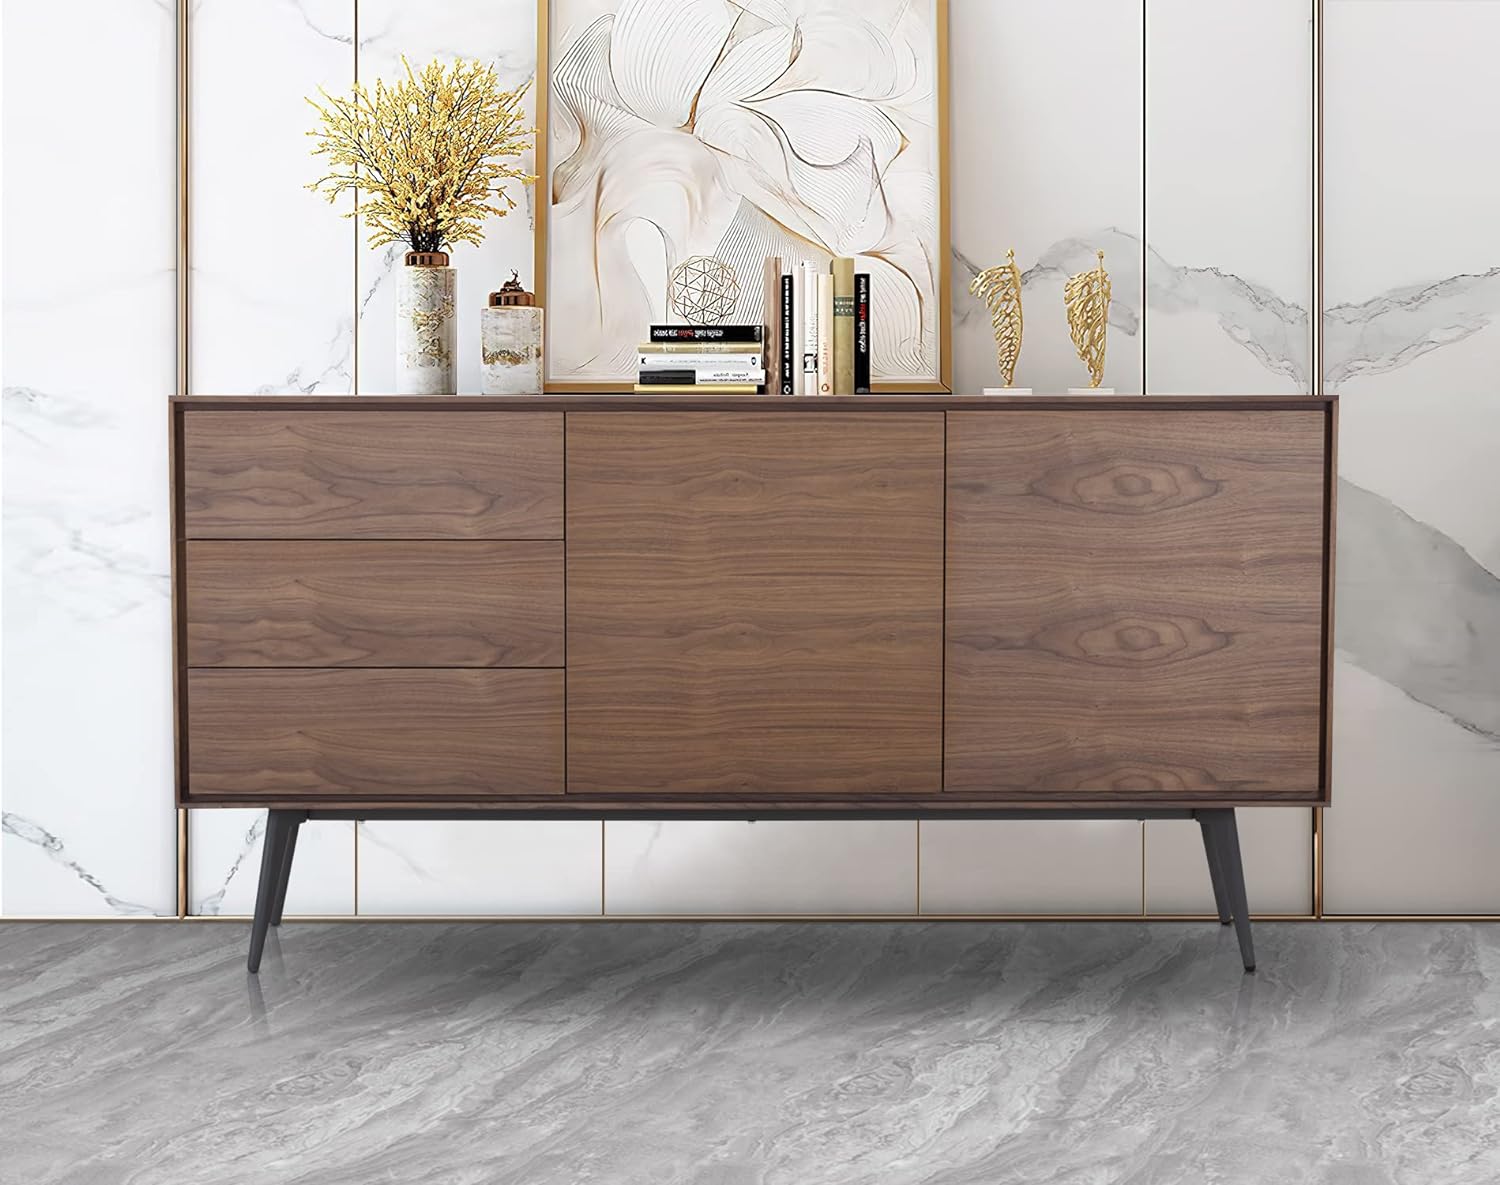 WILLIAMSPACE 62.4 Mid-Century Buffet Sideboard, Modern Walnut Wood Cabinet with 3 Drawers and Adjustable Shelves Storage, Entryway Serving Storage Cabinet with Metal Legs